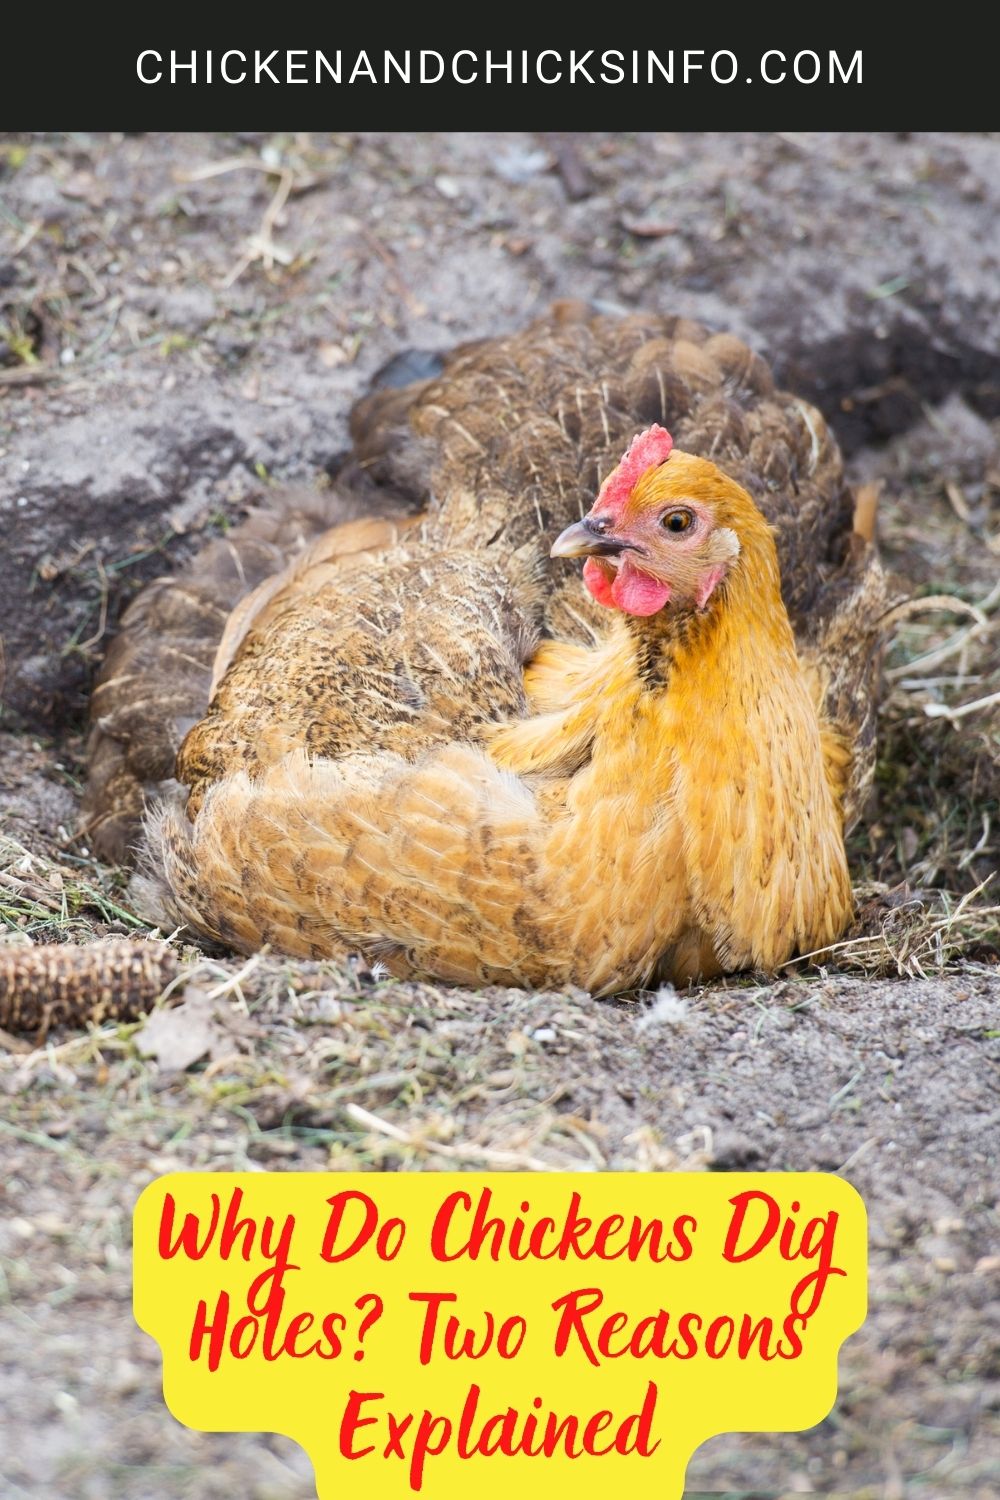 Why Do Chickens Dig Holes? Two Reasons Explained poster.
